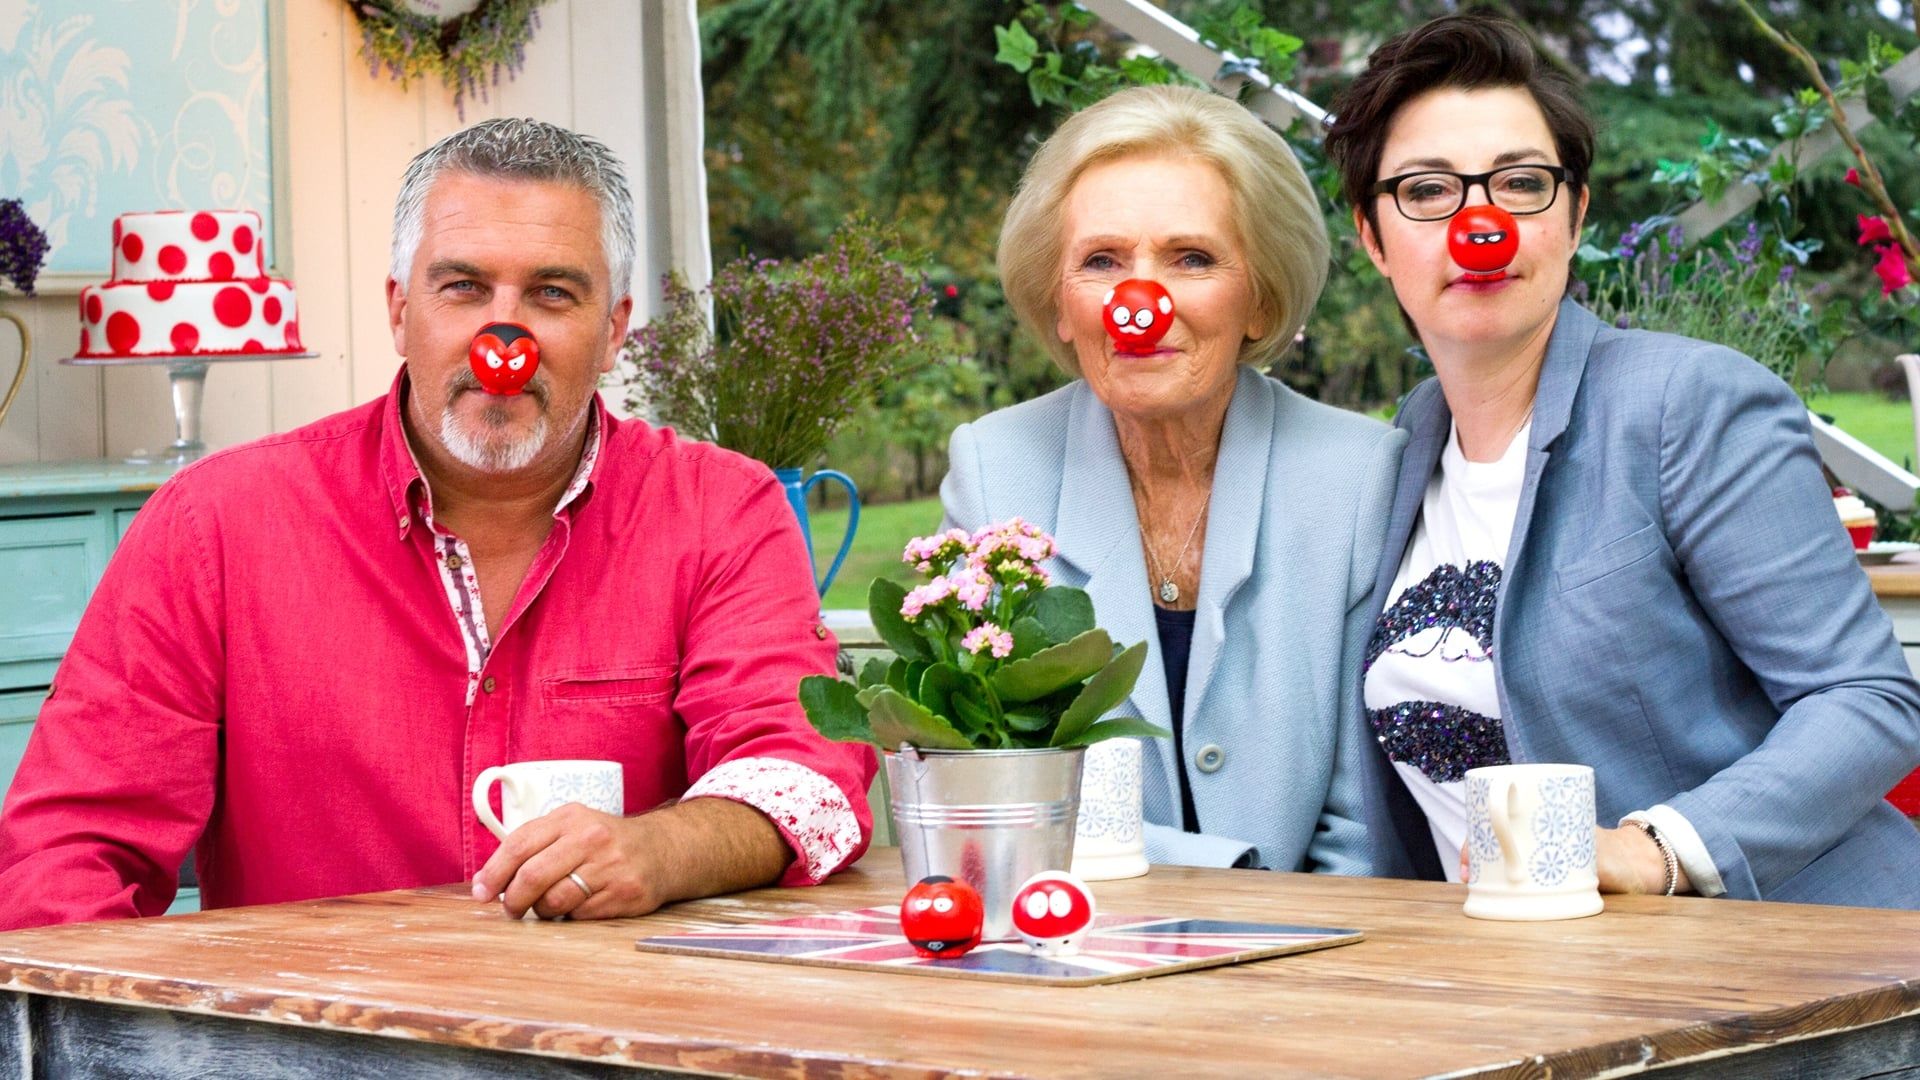 The Great Comic Relief Bake Off background